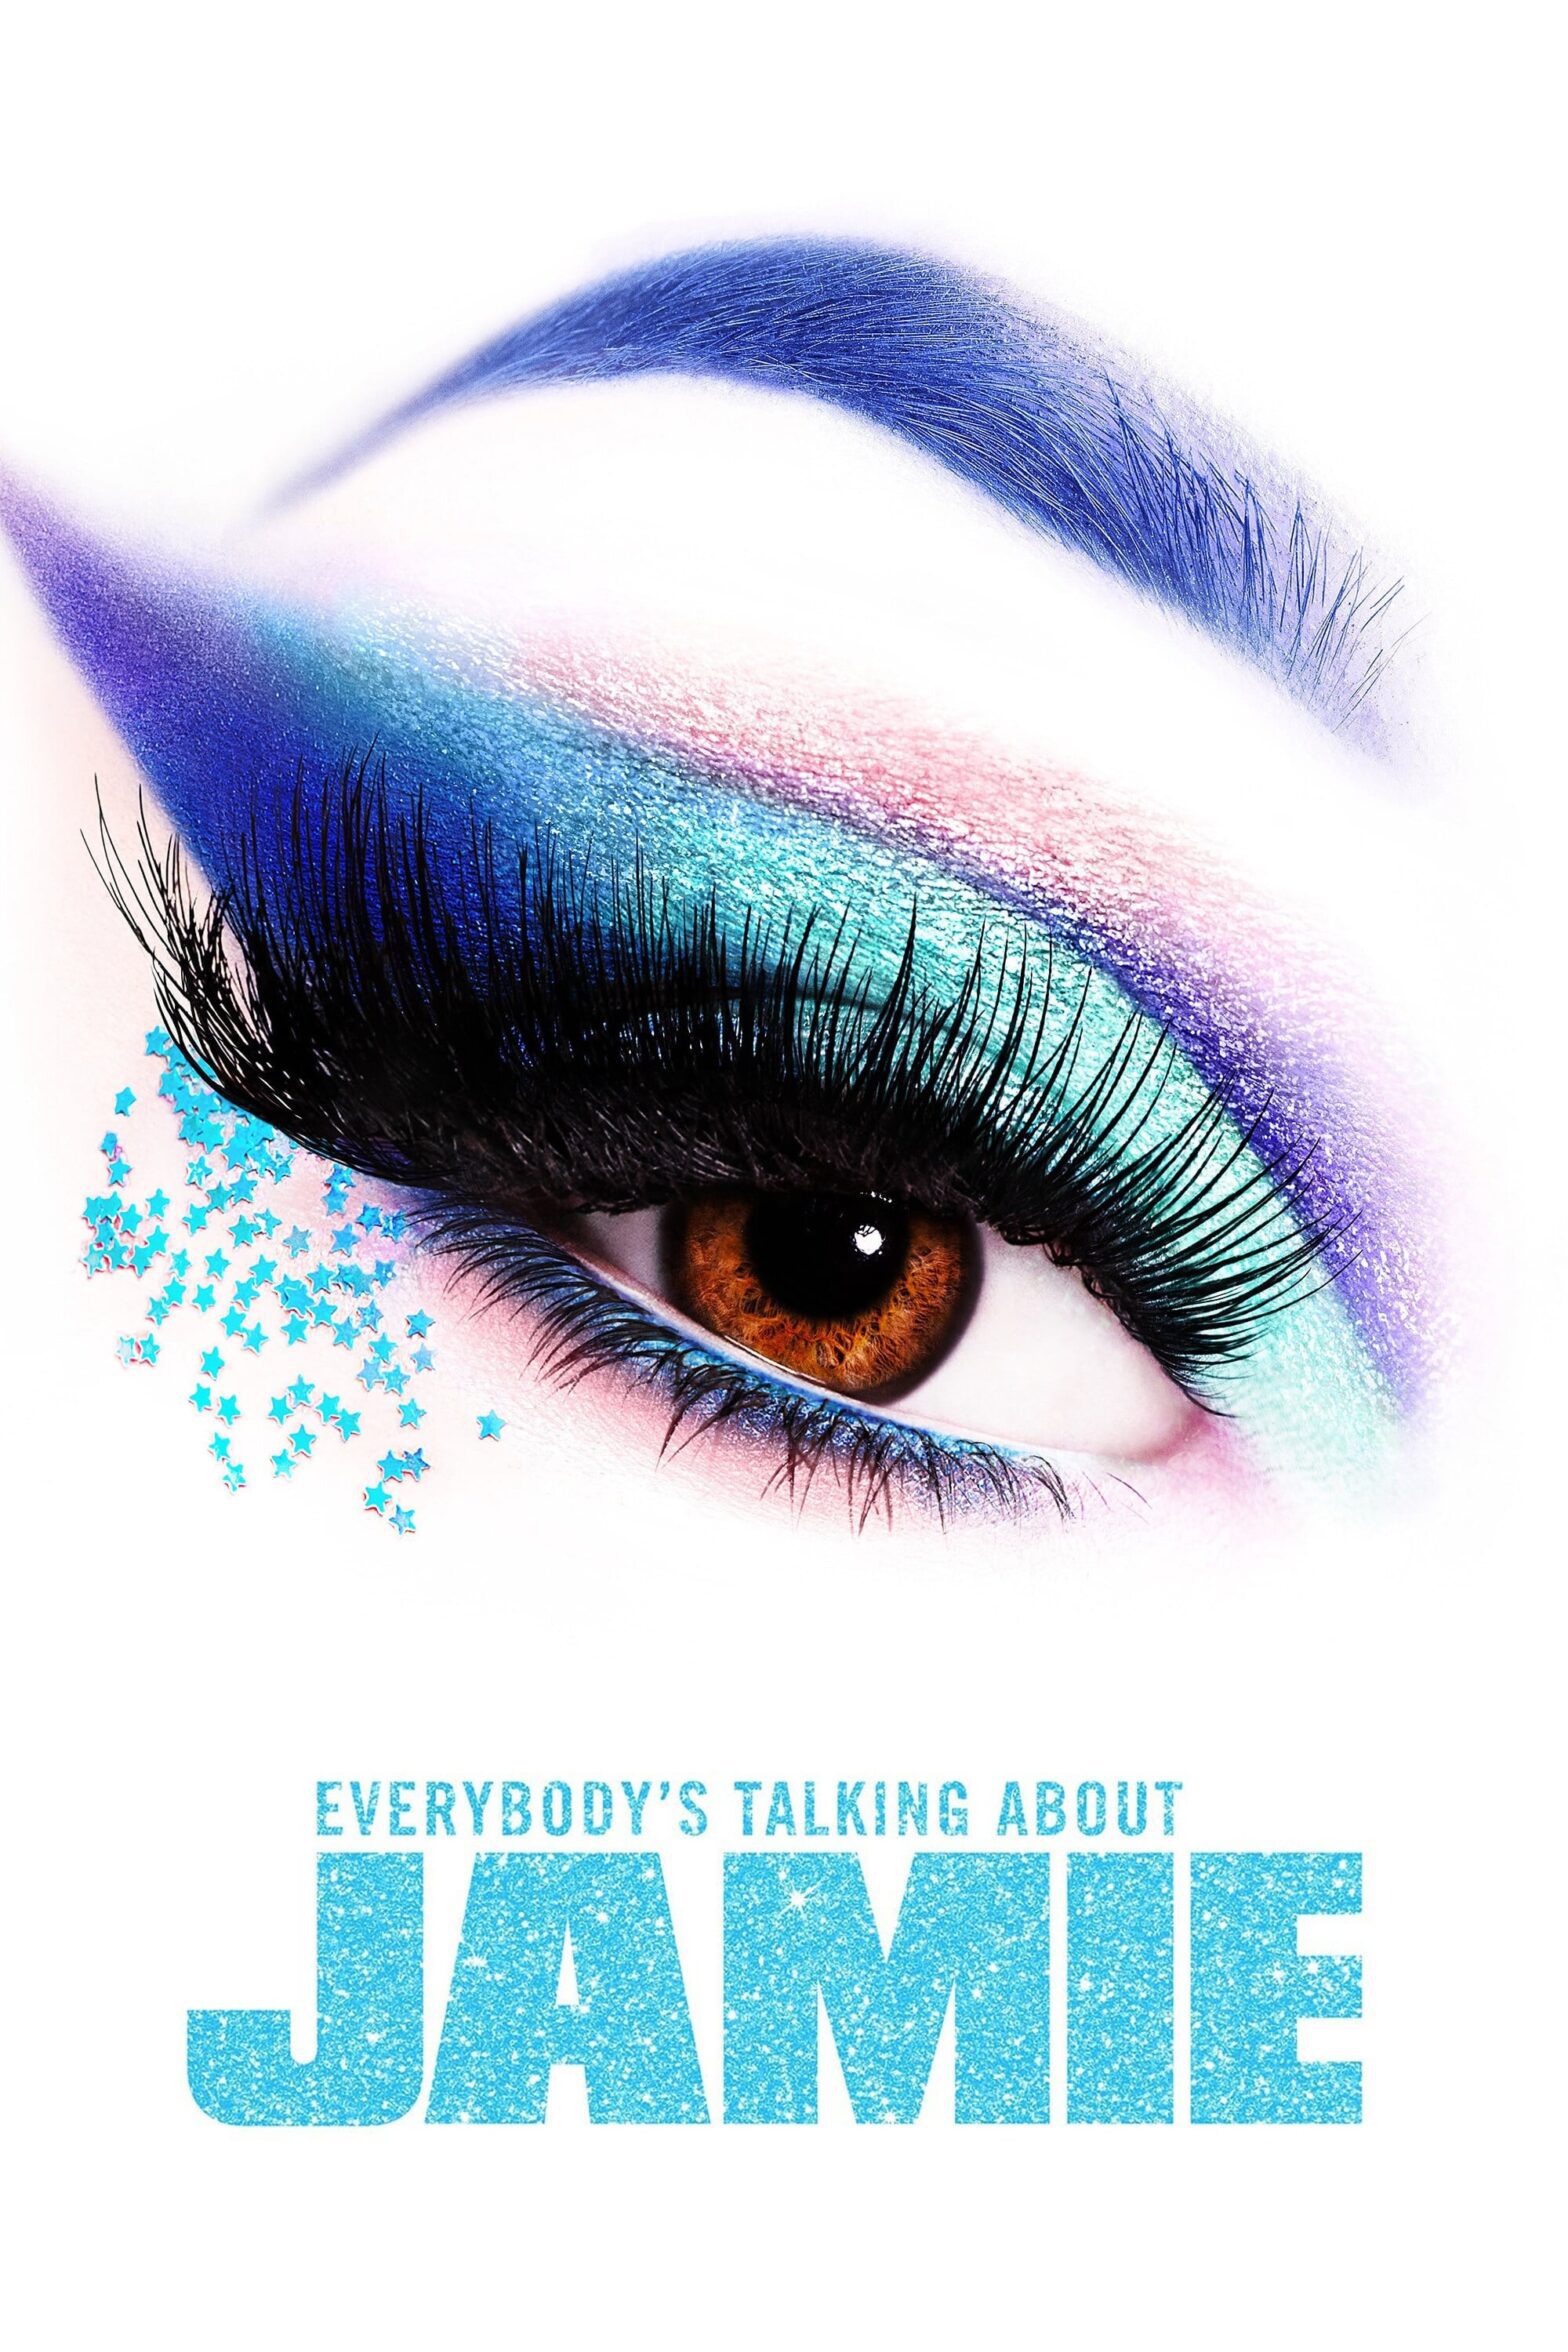 Poster for the movie "Everybody's Talking About Jamie"